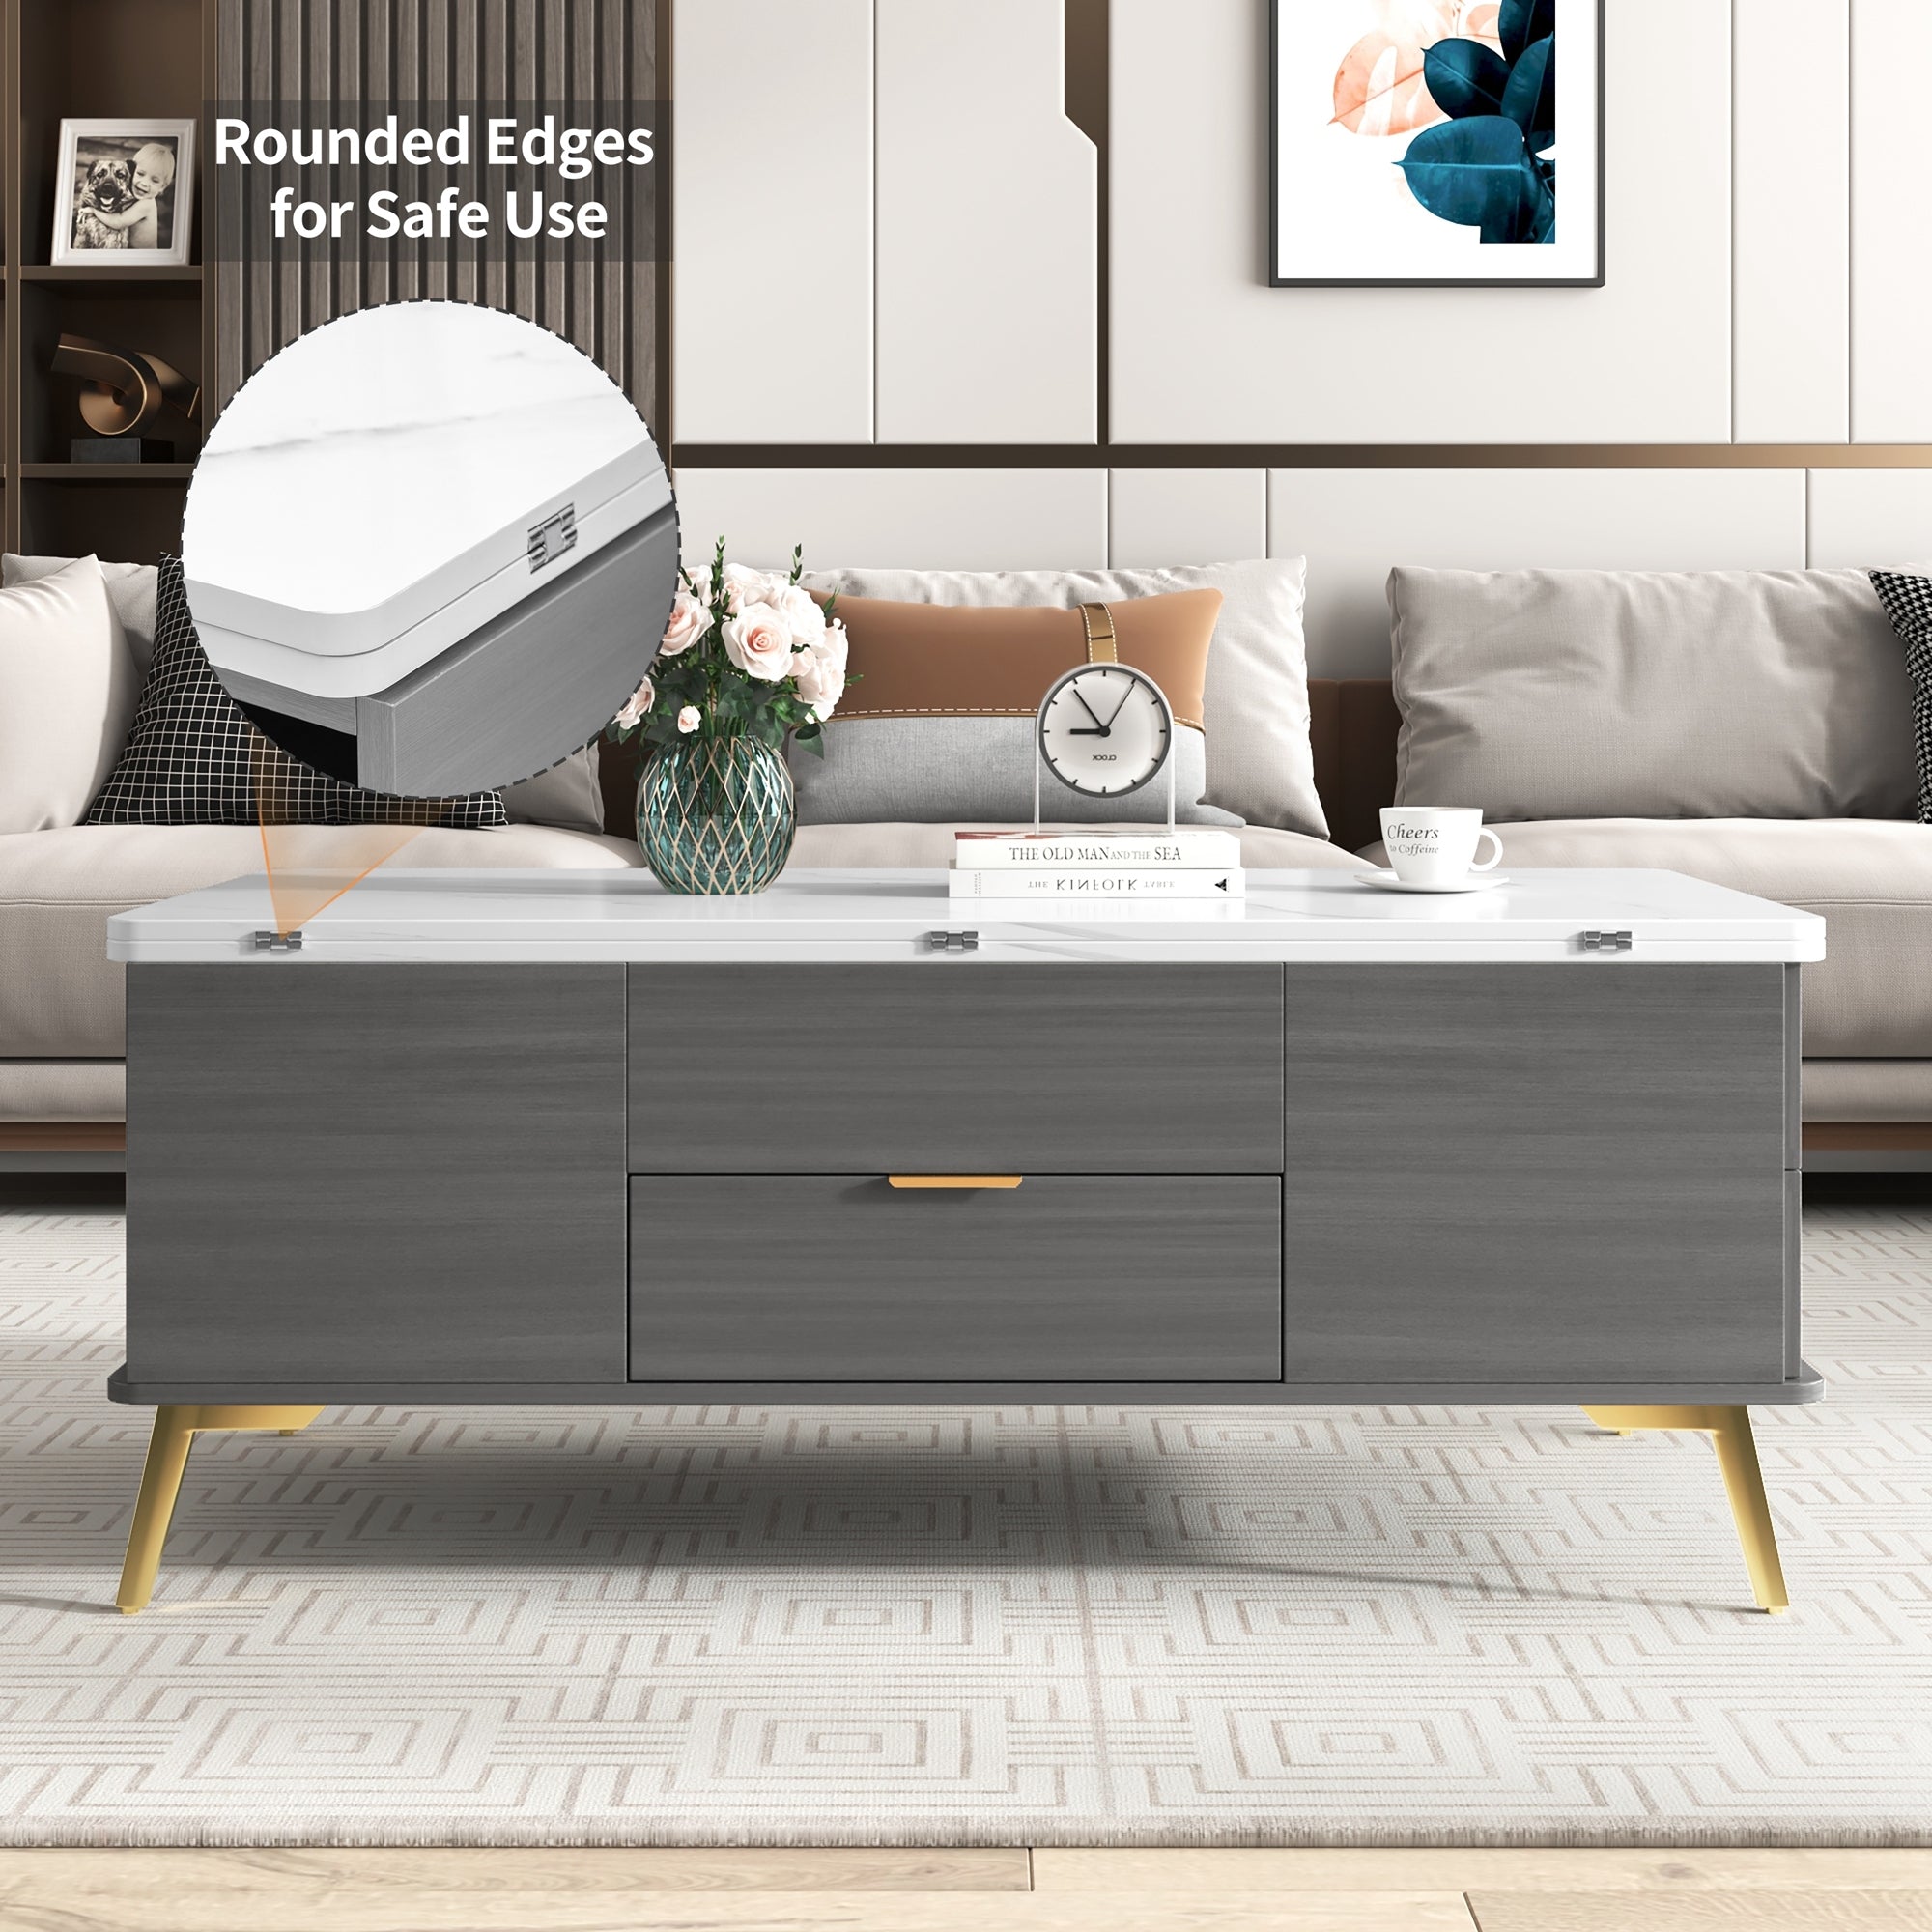 Modern Lift Top Coffee Table Multi Functional Table white+gray-mdf+steel